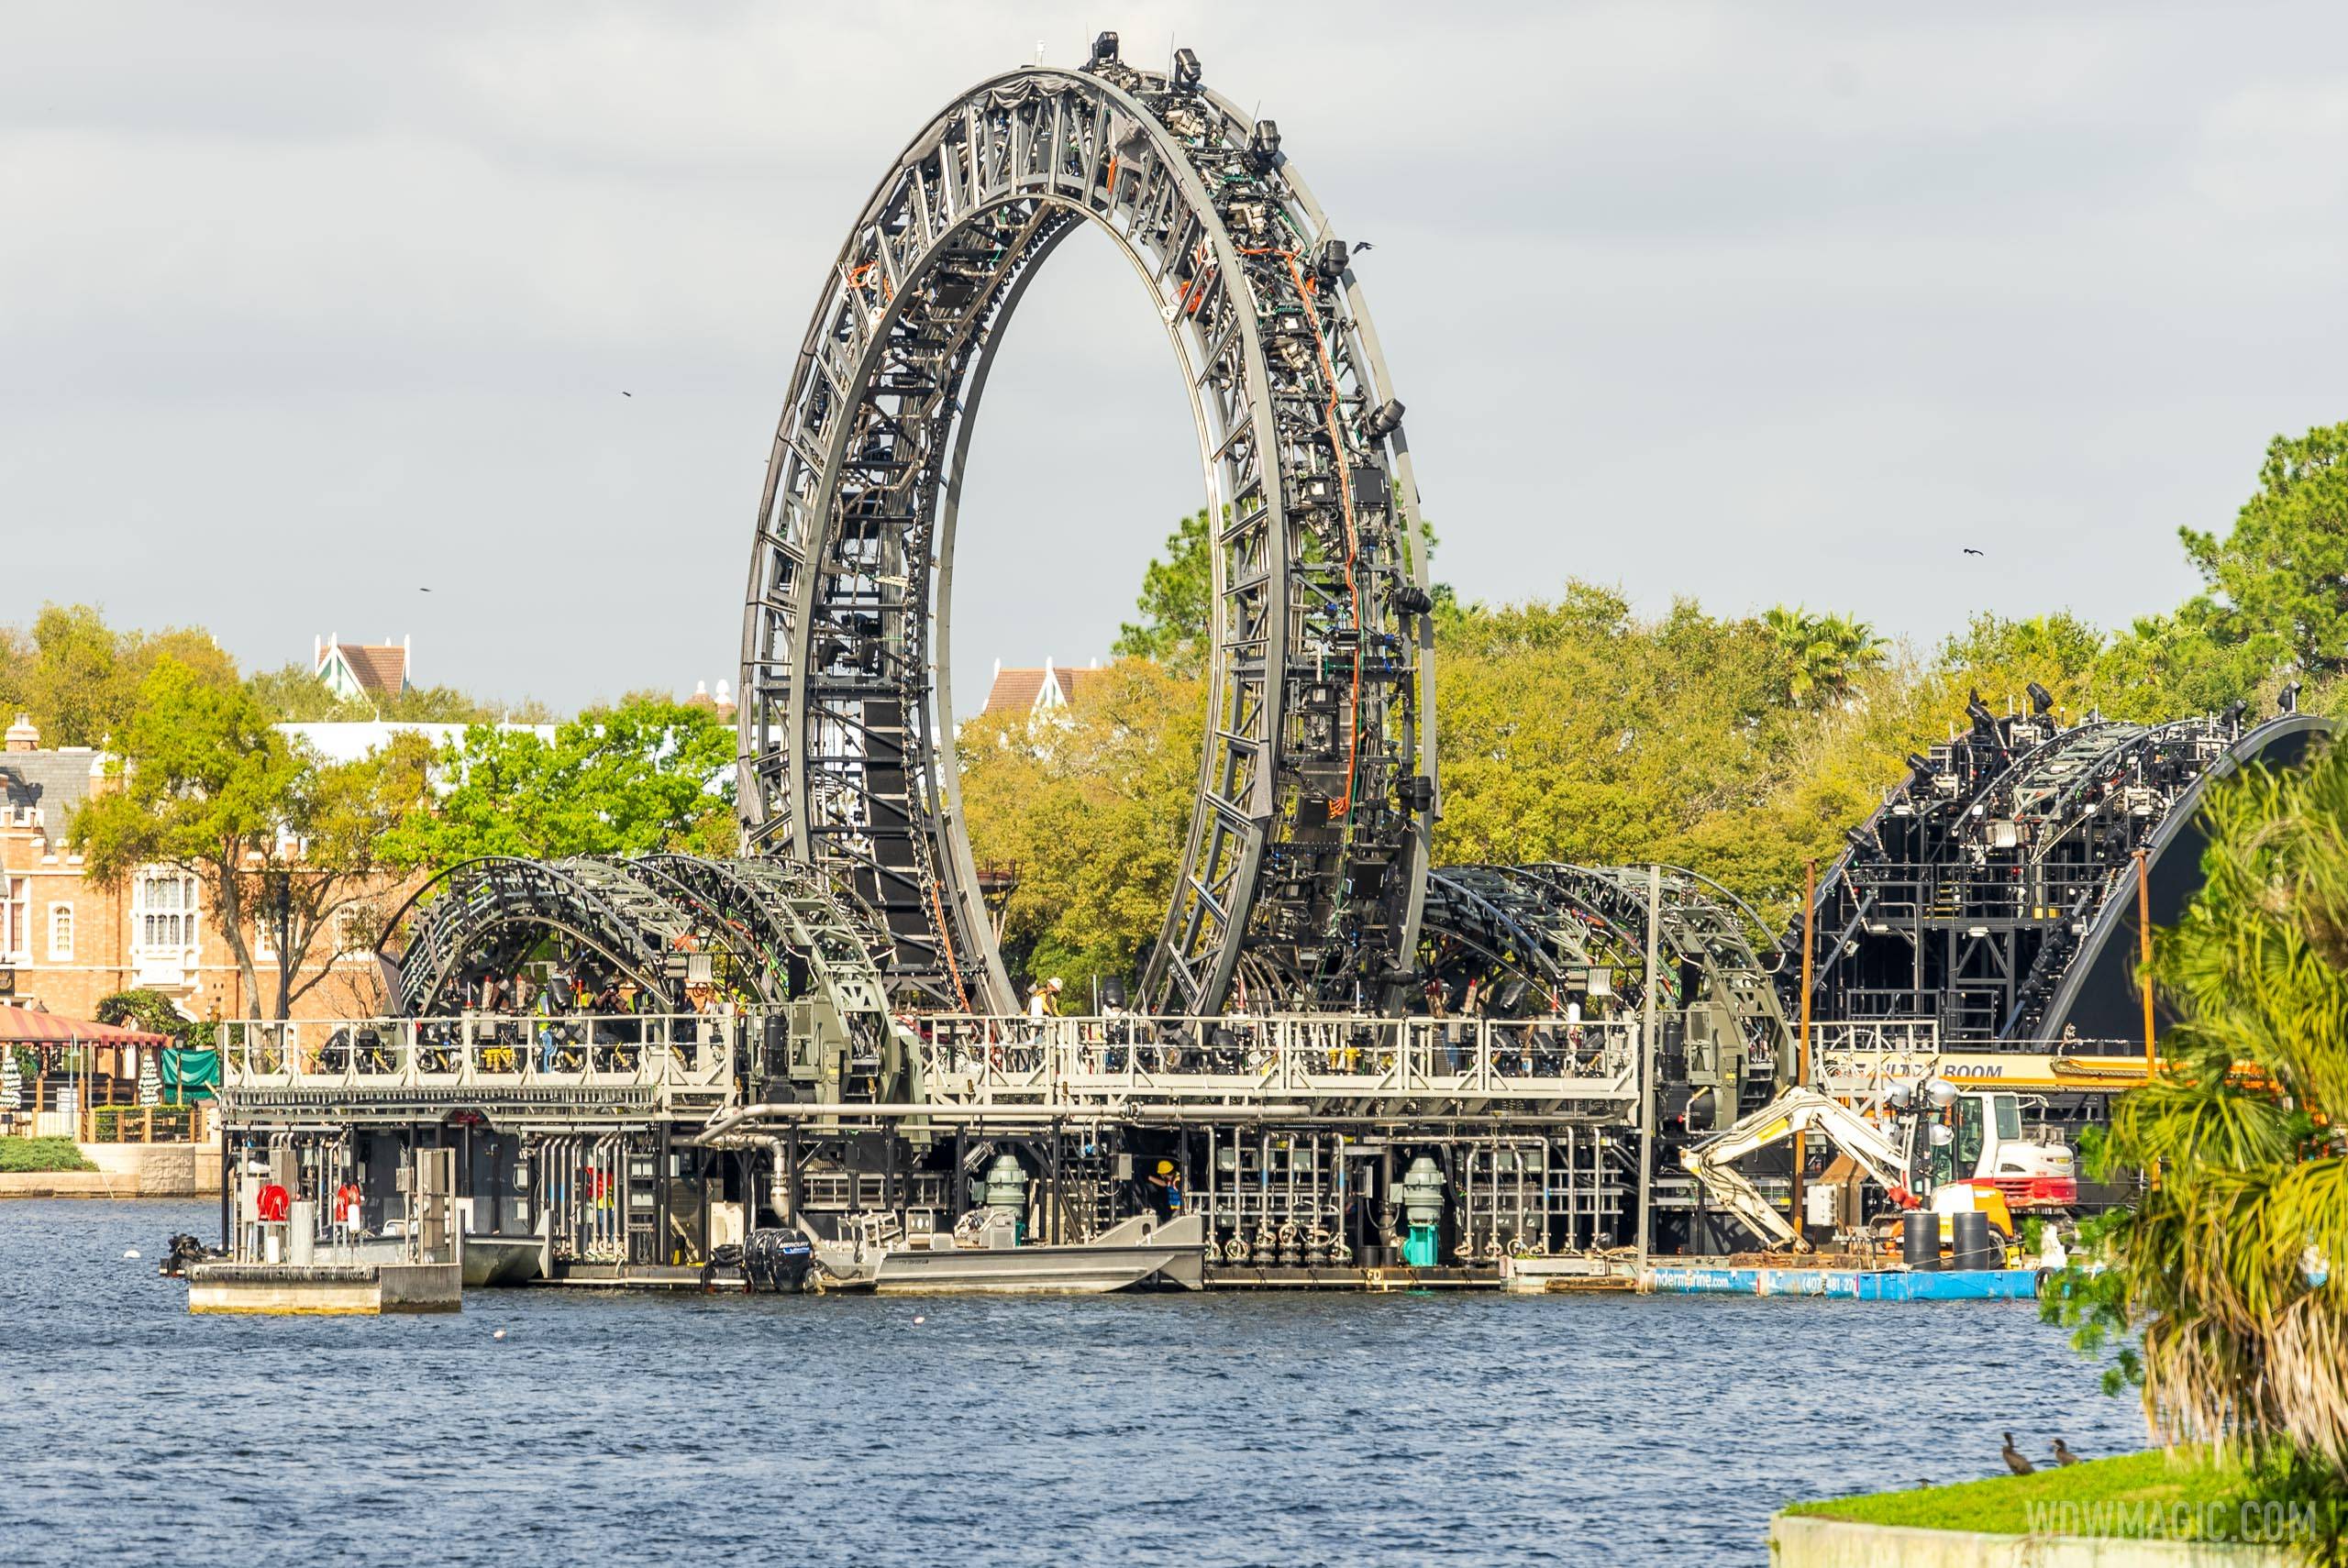 PHOTOS - EPCOT'S Harmonious central icon barge receives third and final platform